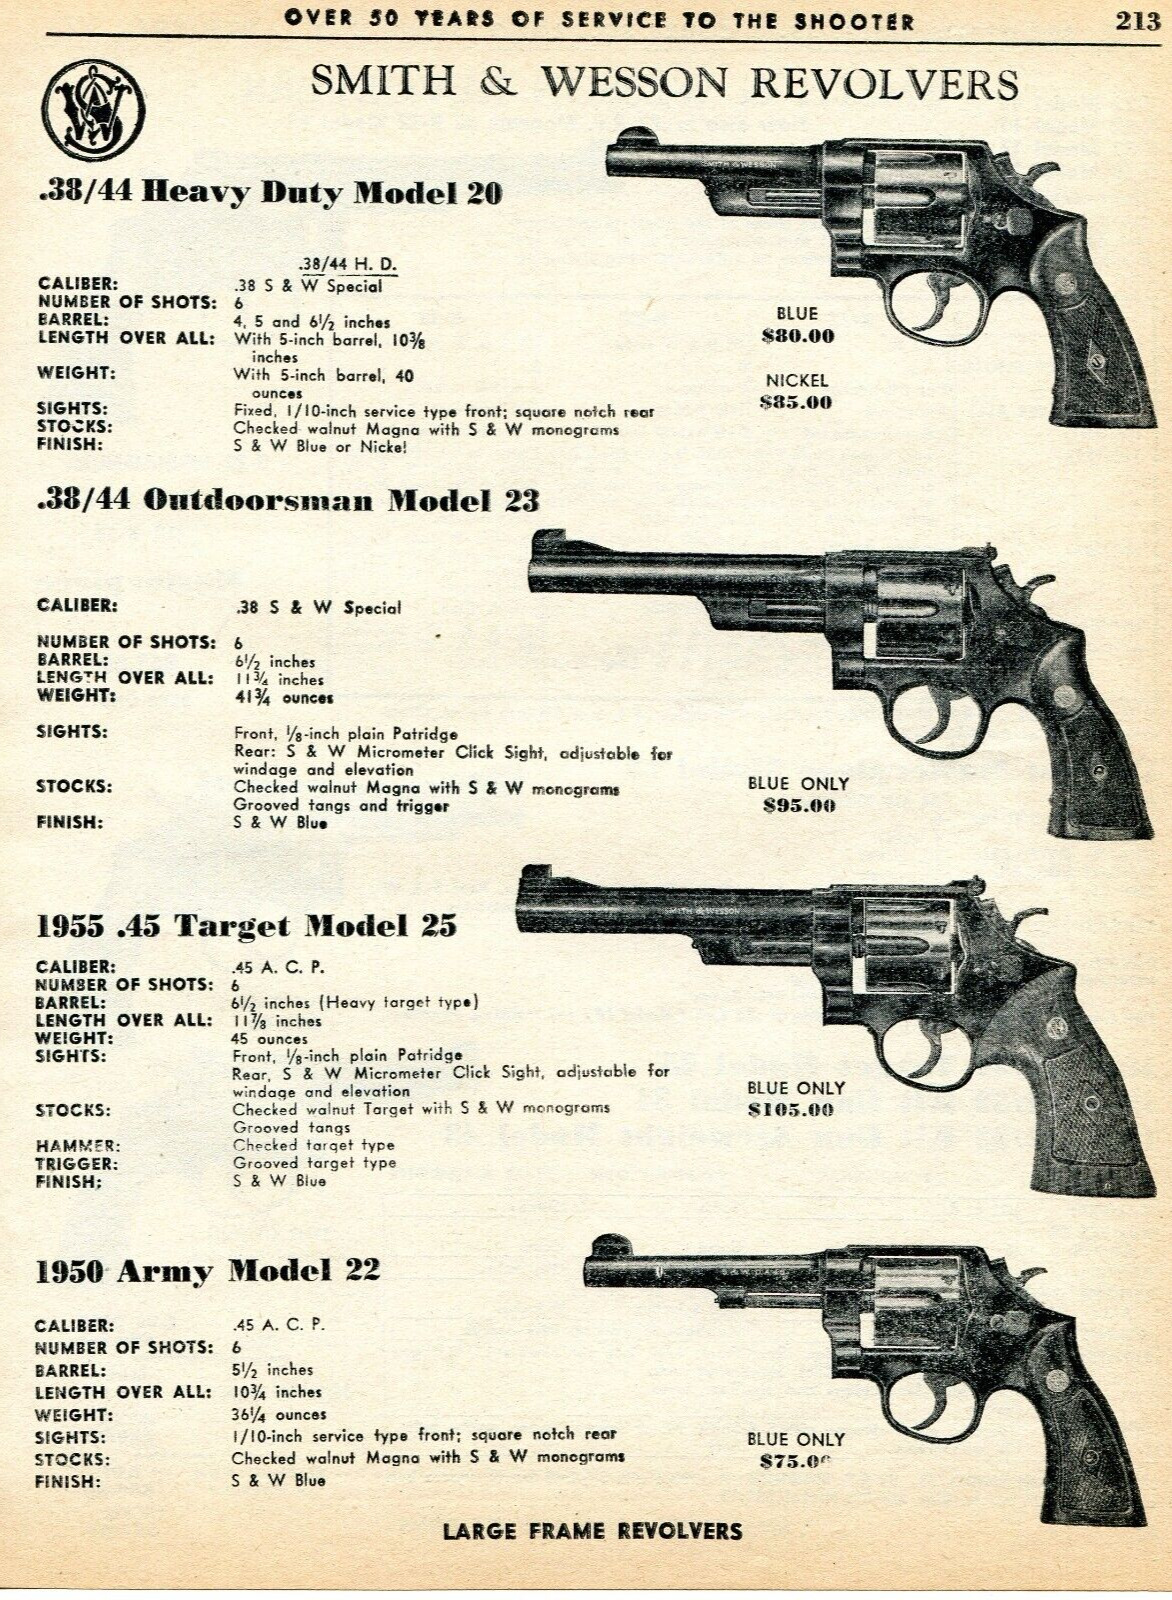 1963 Print Ad of Smith & Wesson S&W Model 20, 23, 25 1955, 22 1950 Army Revolver